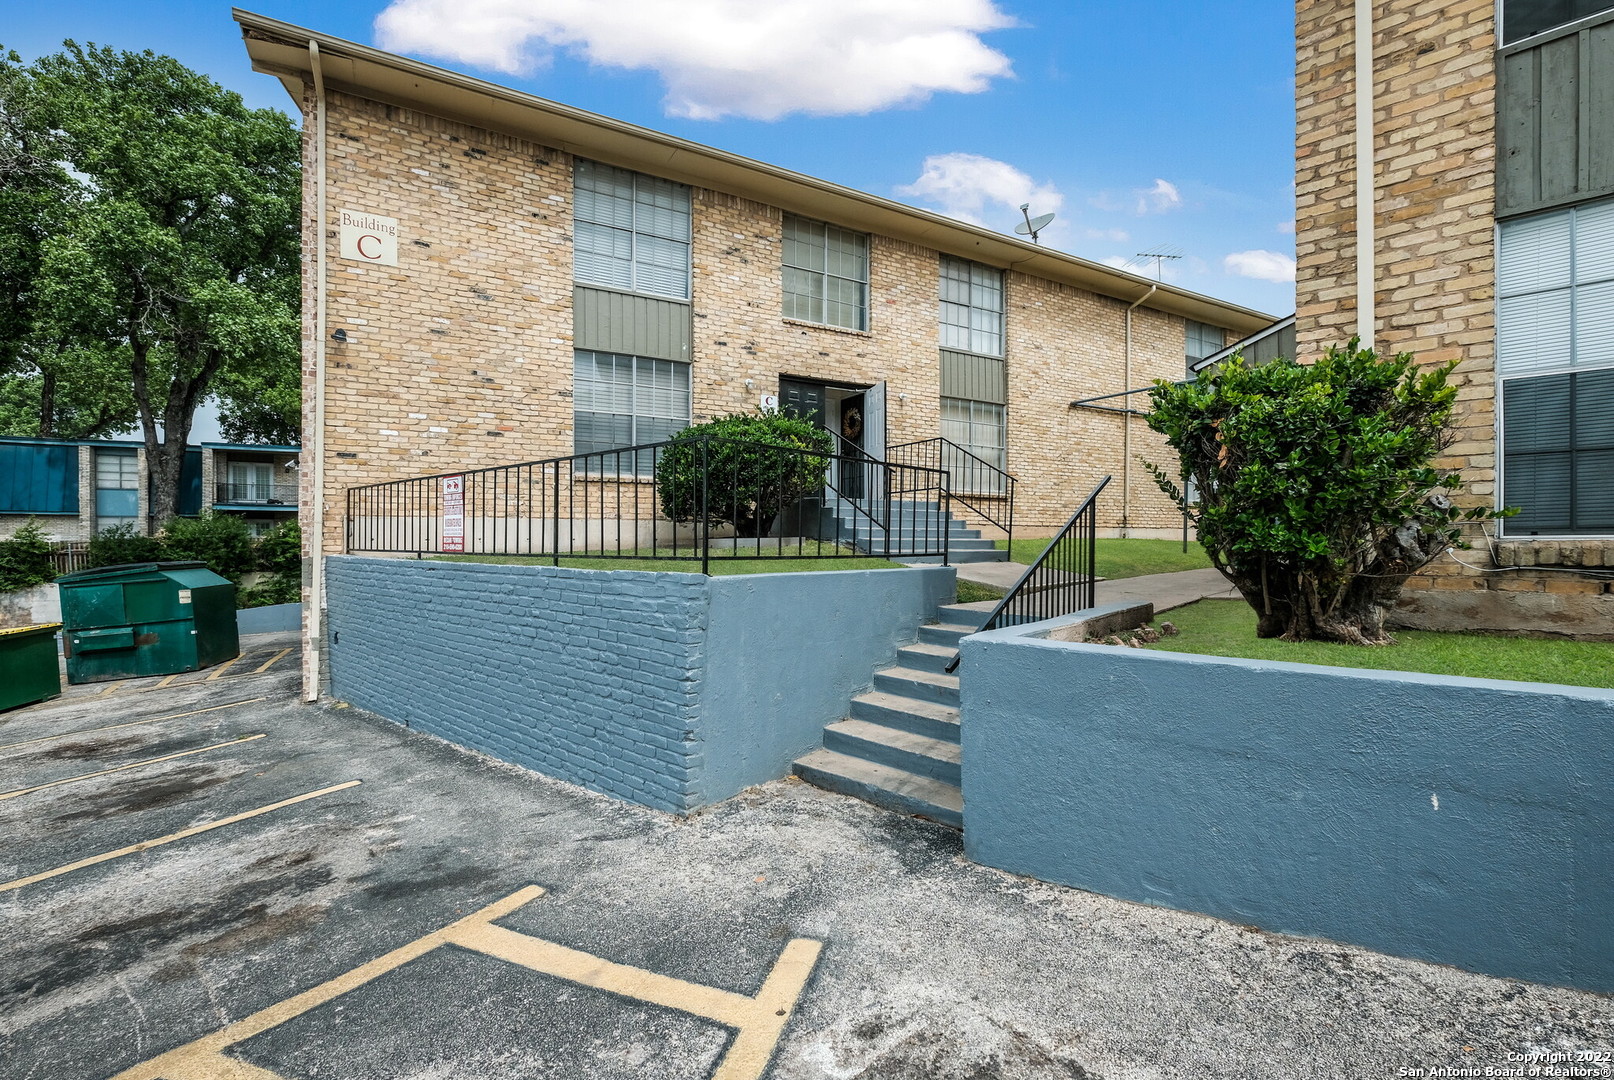 Updated first level 1 bedroom condo. HVAC updated approx 2017. Washer & dryer connections available in common area. Unit comes  with 1 covered parking spot. Condo dues include water, trash and limited insurance. Conveniently located close to the medical center,  IH10 & Loop 410.